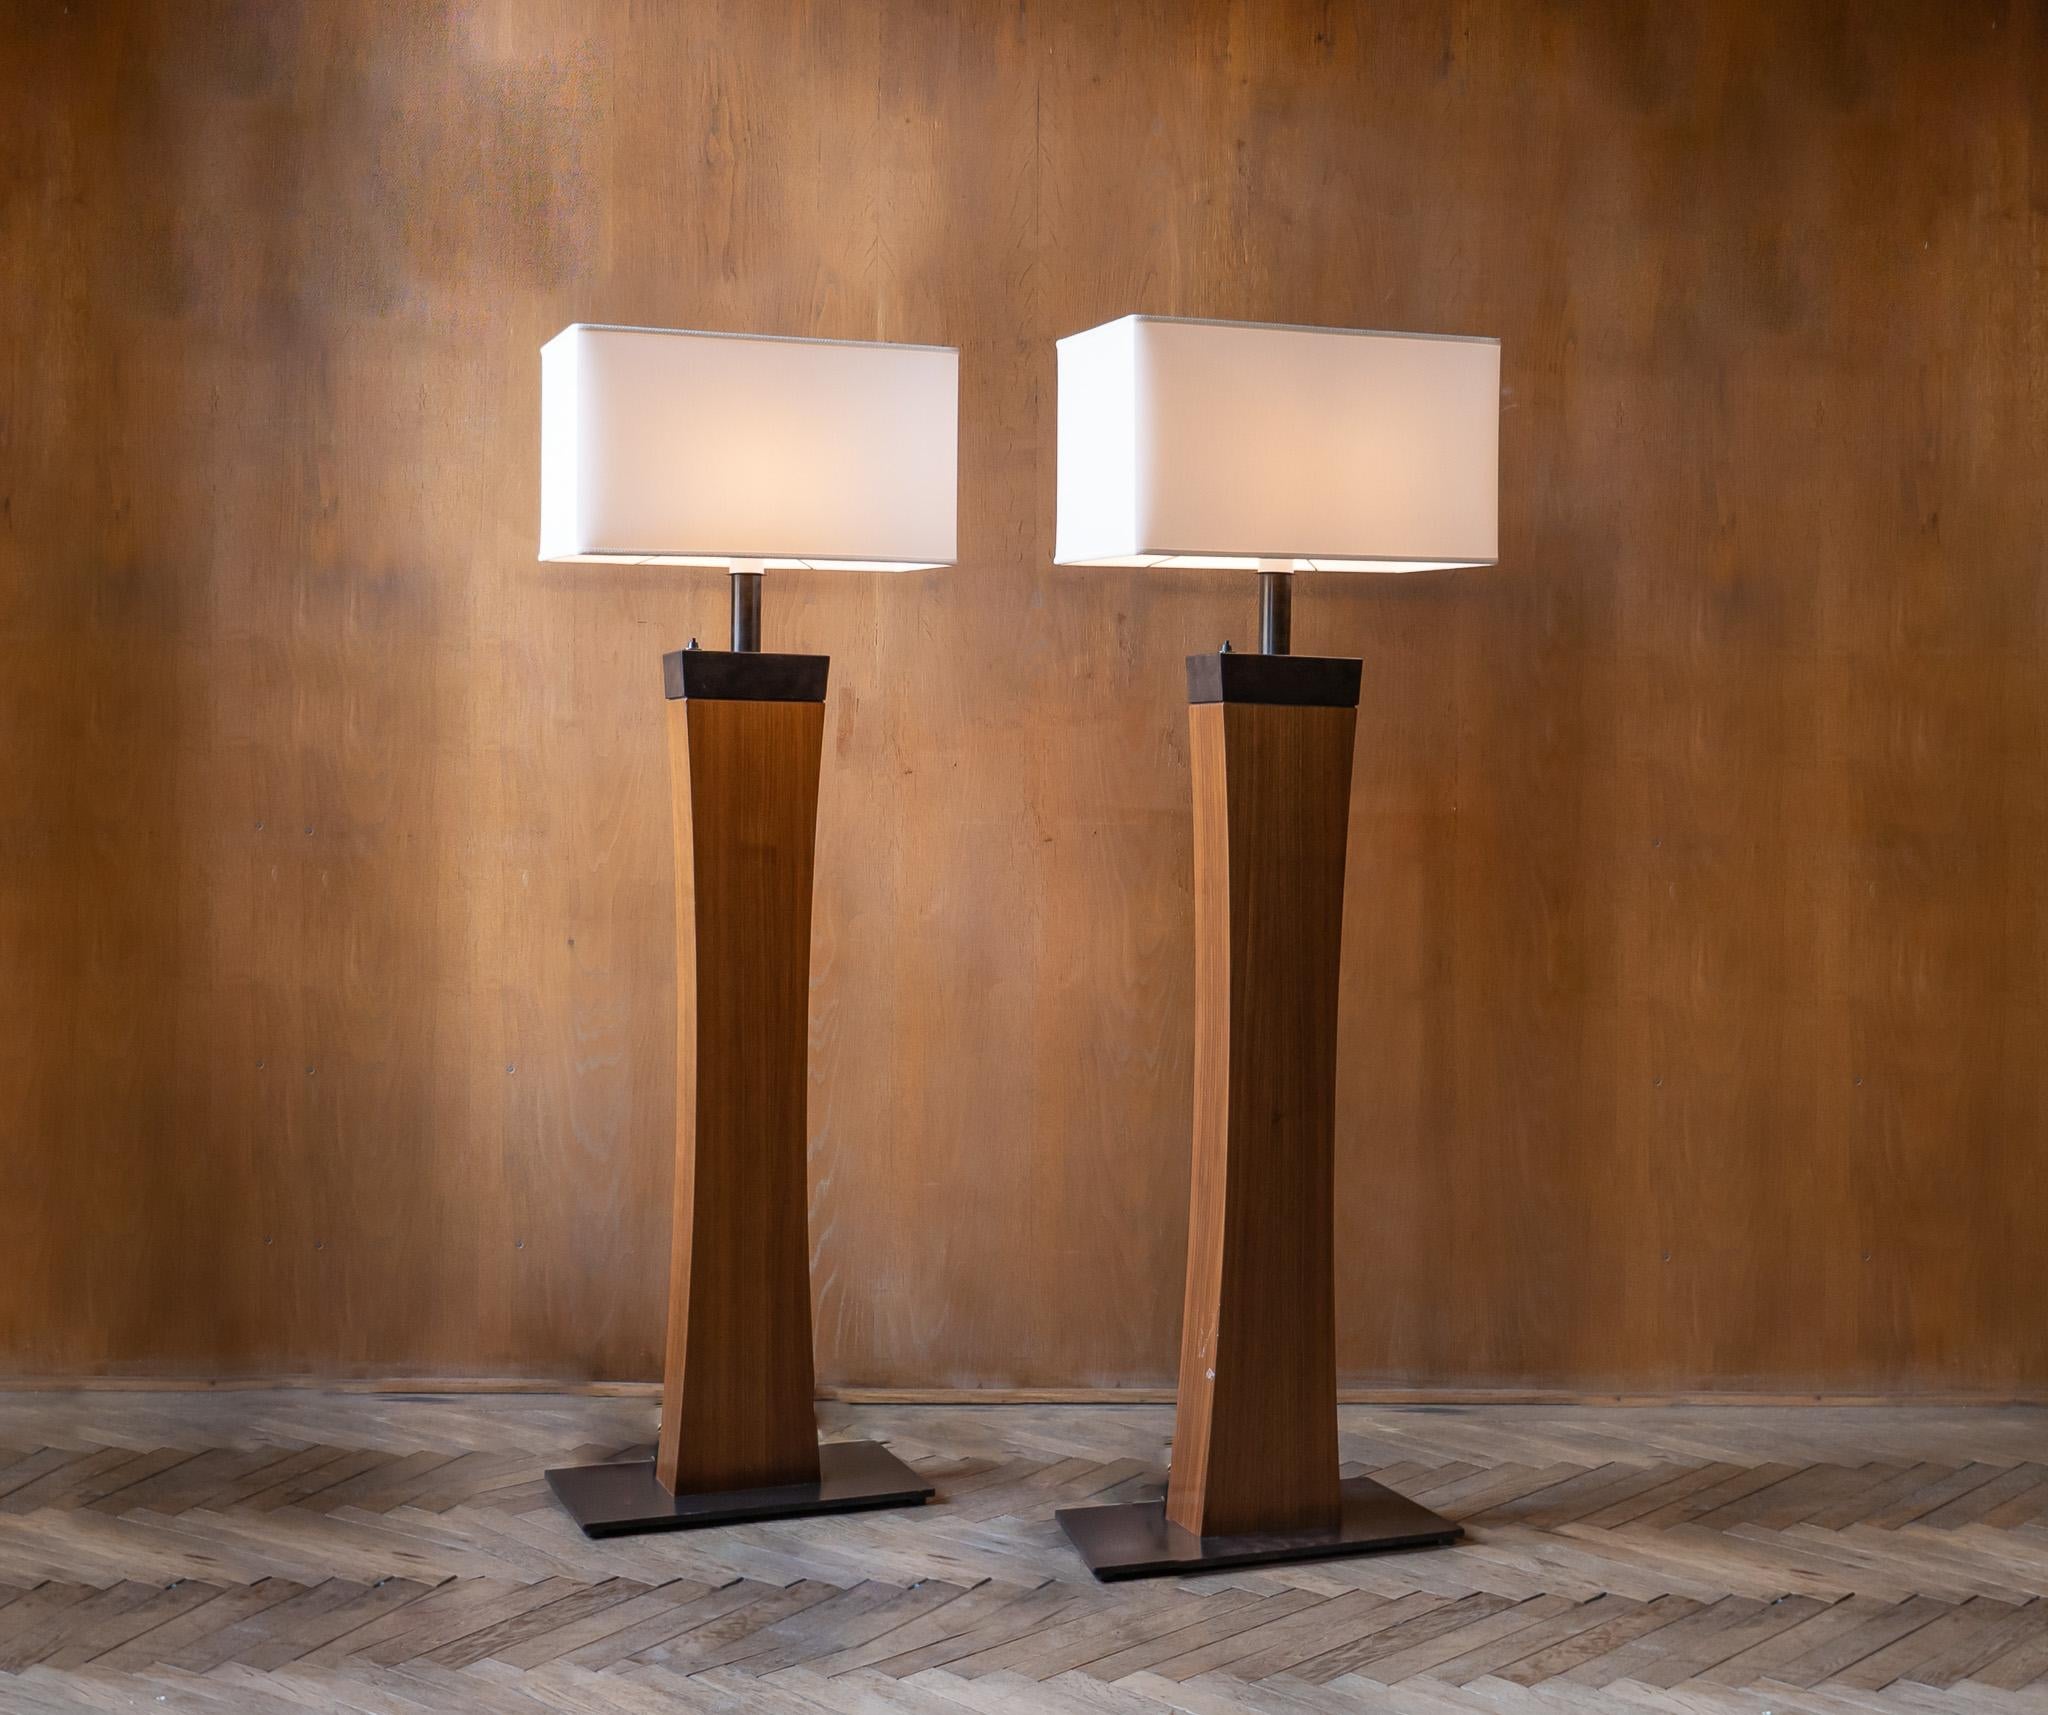 Set of 2 Mid-Century Modern Wooden Italian Floor Lamps, Italy 1970s.

This set of 2 Mid-Century Modern Italian floor lamps were produced in the late 1970s.
These lamps feature a sleek and stylish design with a wooden and metal base that provides